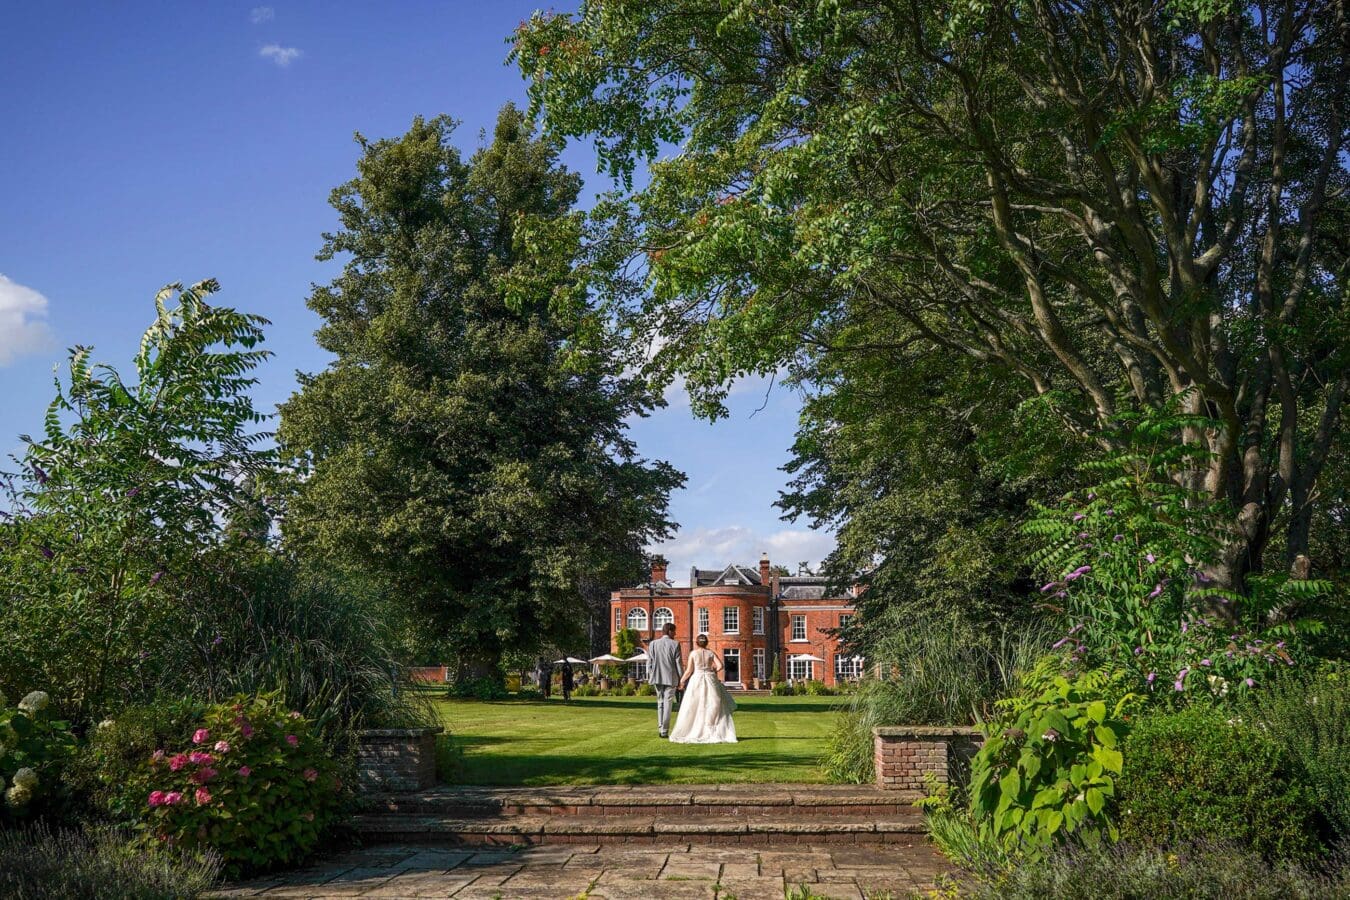 wedding image from the royal berkshire hotel gardens